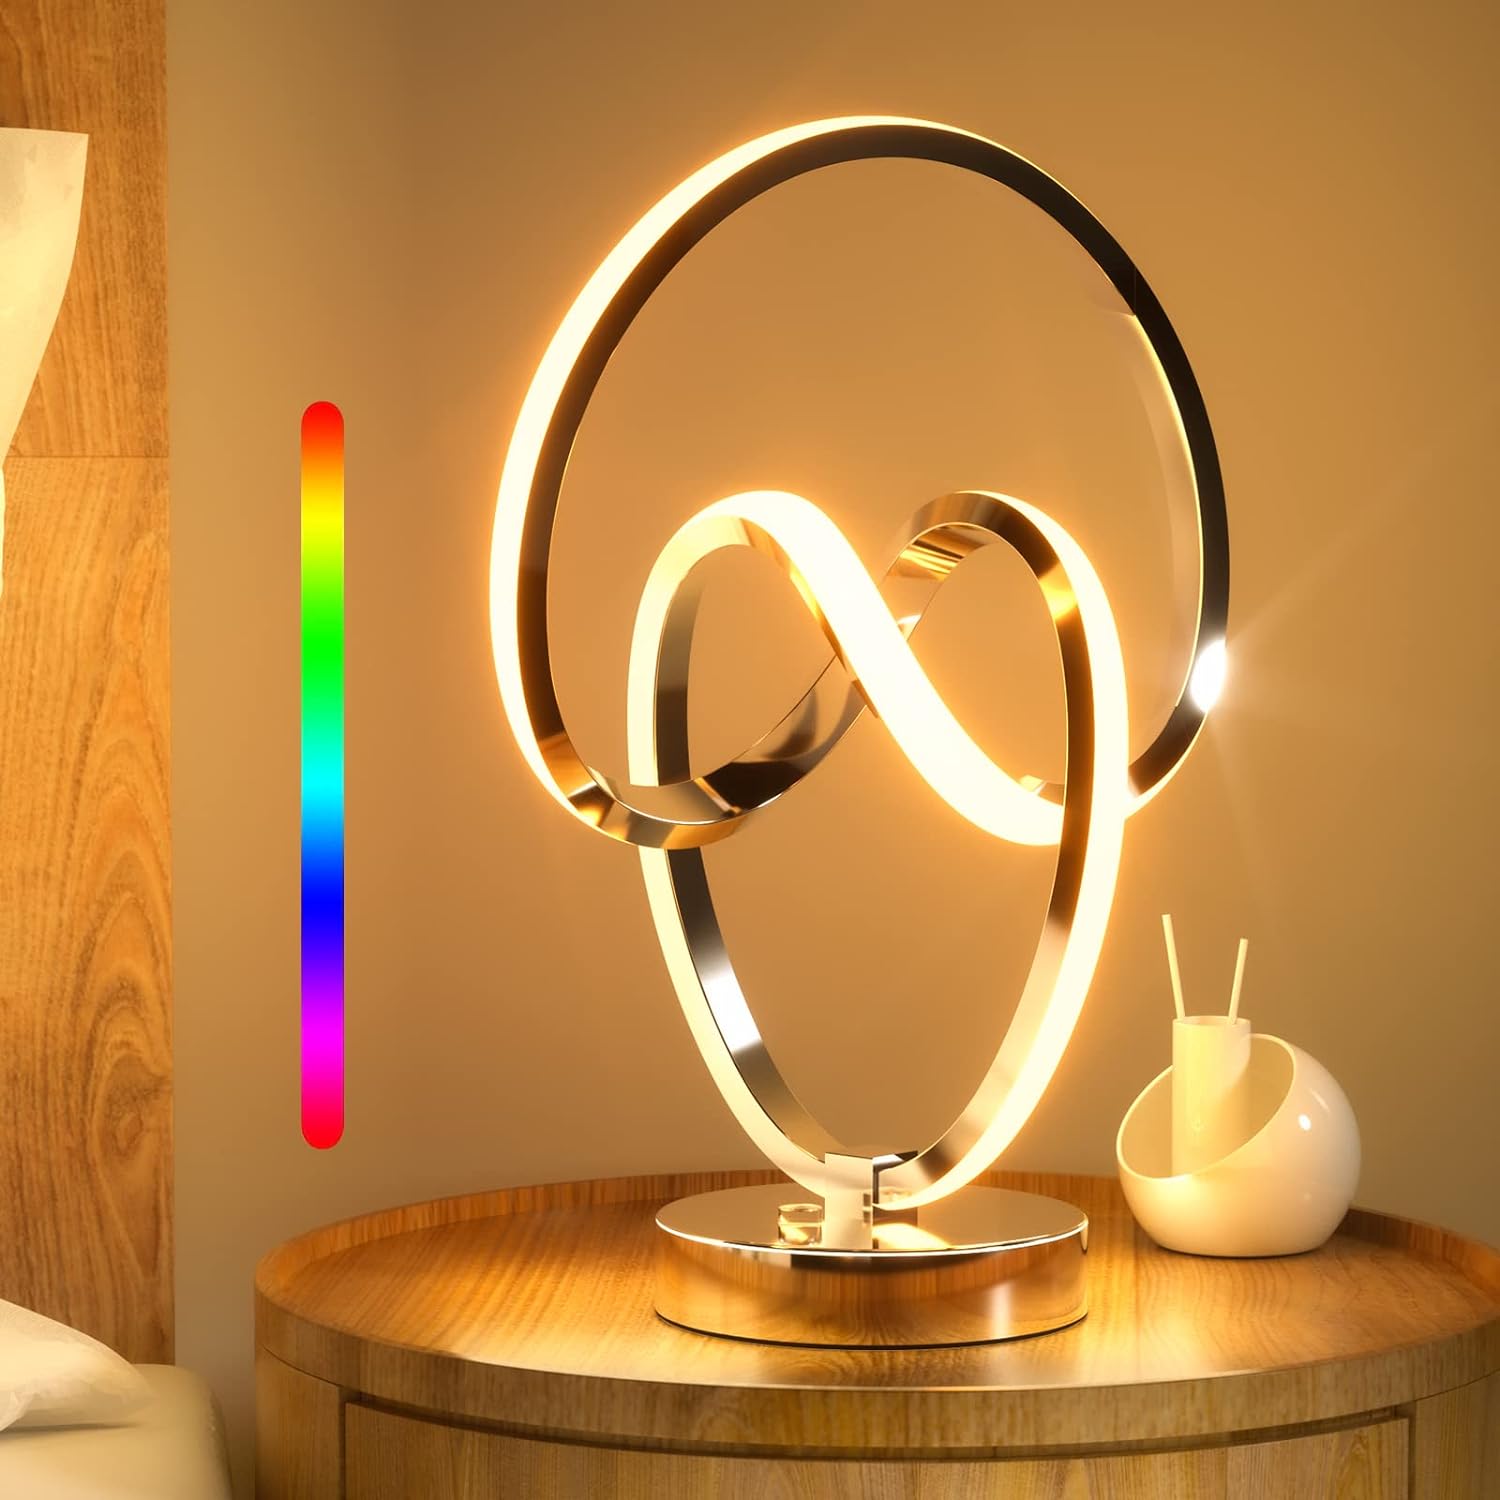 Modern Spiral RGB Table Lamp, Touch Dimmable LED Bedside Lamp, Modern Nightstand lamp with 10 Lighting Modes, Cool Lamps for Bedroom Living Room Office Art Deco, Unique Lamps for Gift Giving